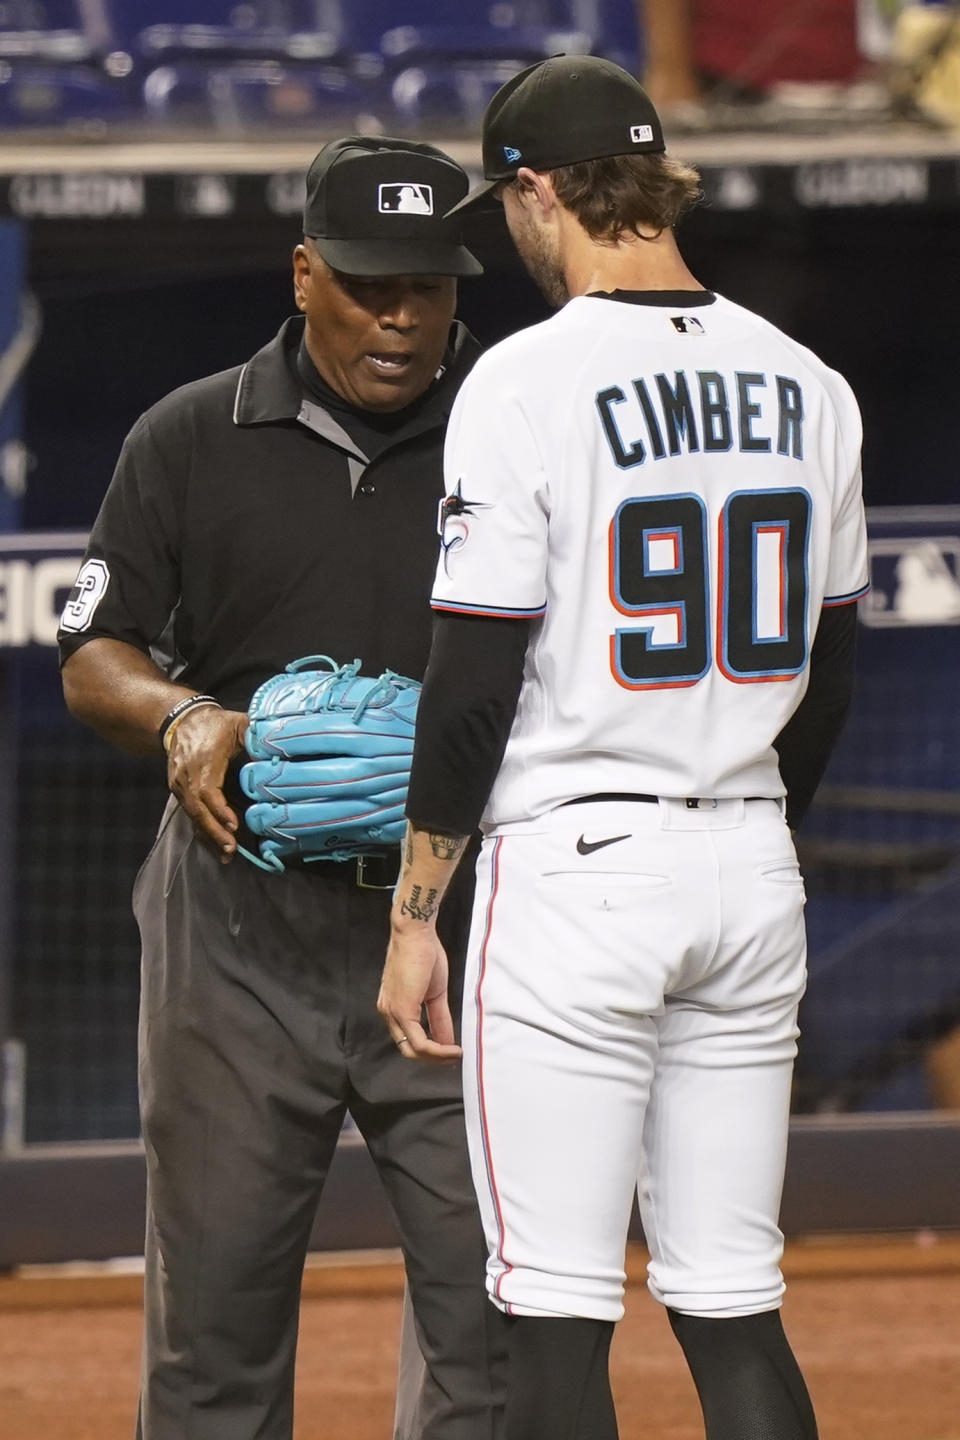 MLB umpire Laz Diaz checks the glove of Miami Marlins relief pitcher Adam Cimber (90) during the sixth inning of a baseball game against the Toronto Blue Jays, Wednesday, June 23, 2021, in Miami. (AP Photo/Marta Lavandier)